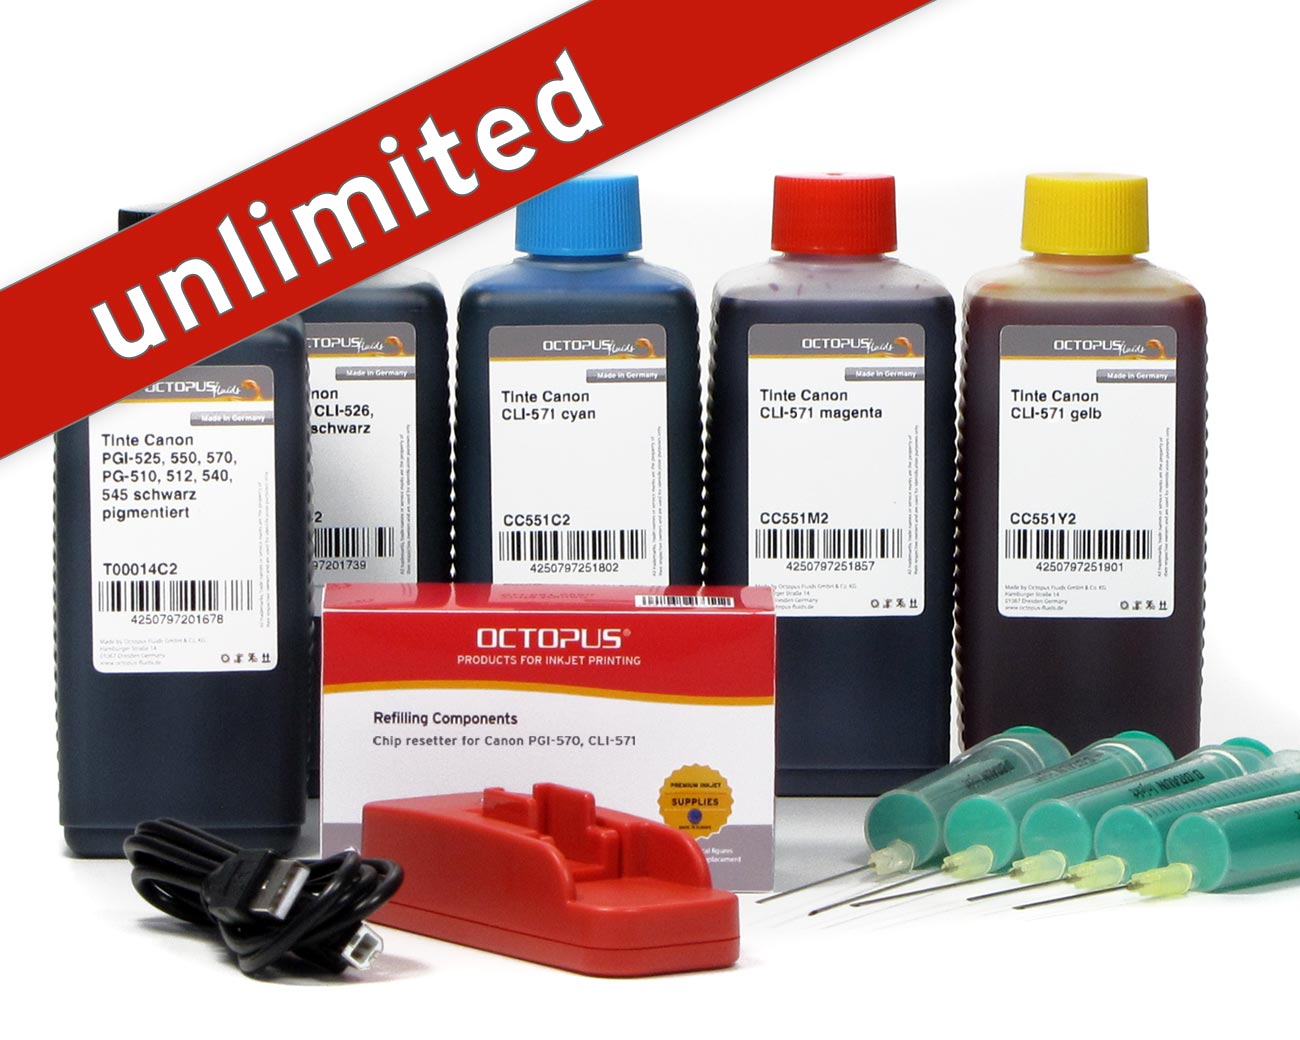 Set with chip resetter for Canon PGI-570, CLI-571 inkjet cartridges and 5x refill ink